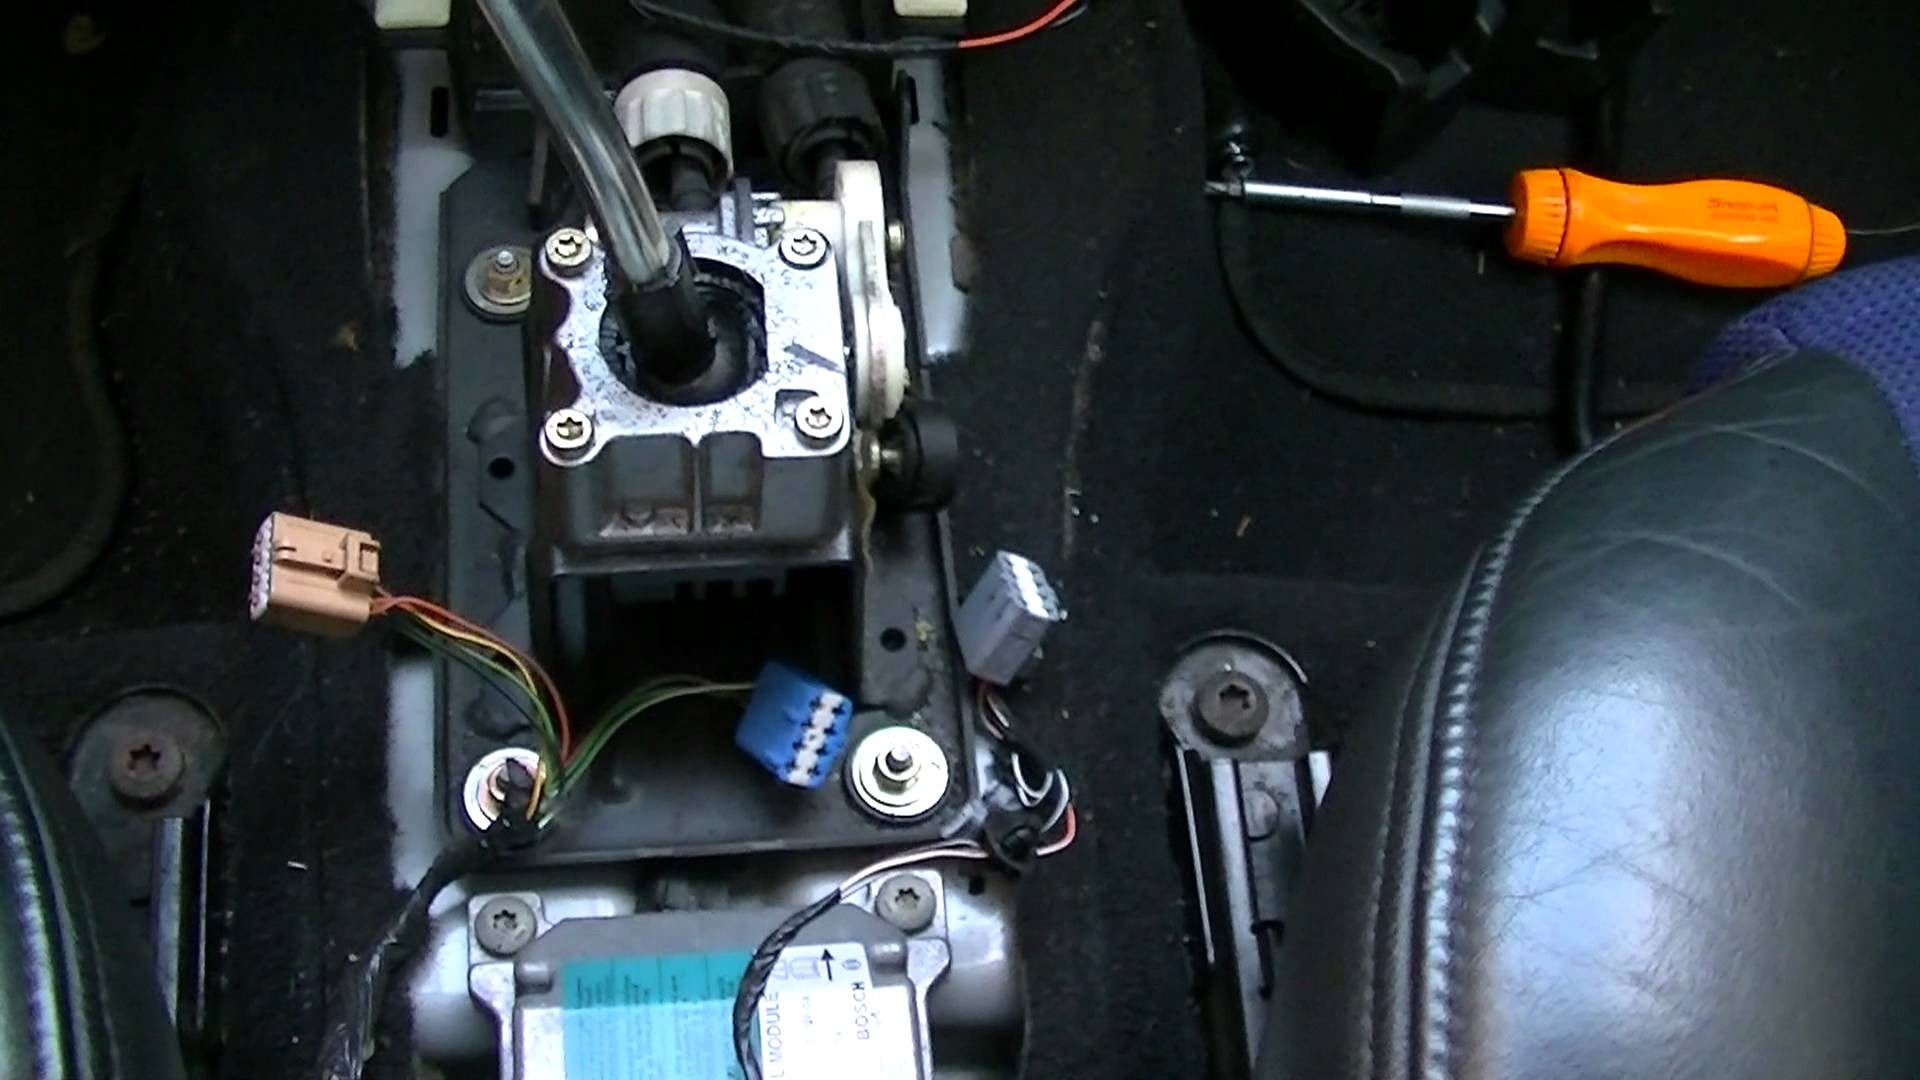 Ford Ka Engine Diagram Focus Shifter Cables Part 1 Of Ford Ka Engine Diagram